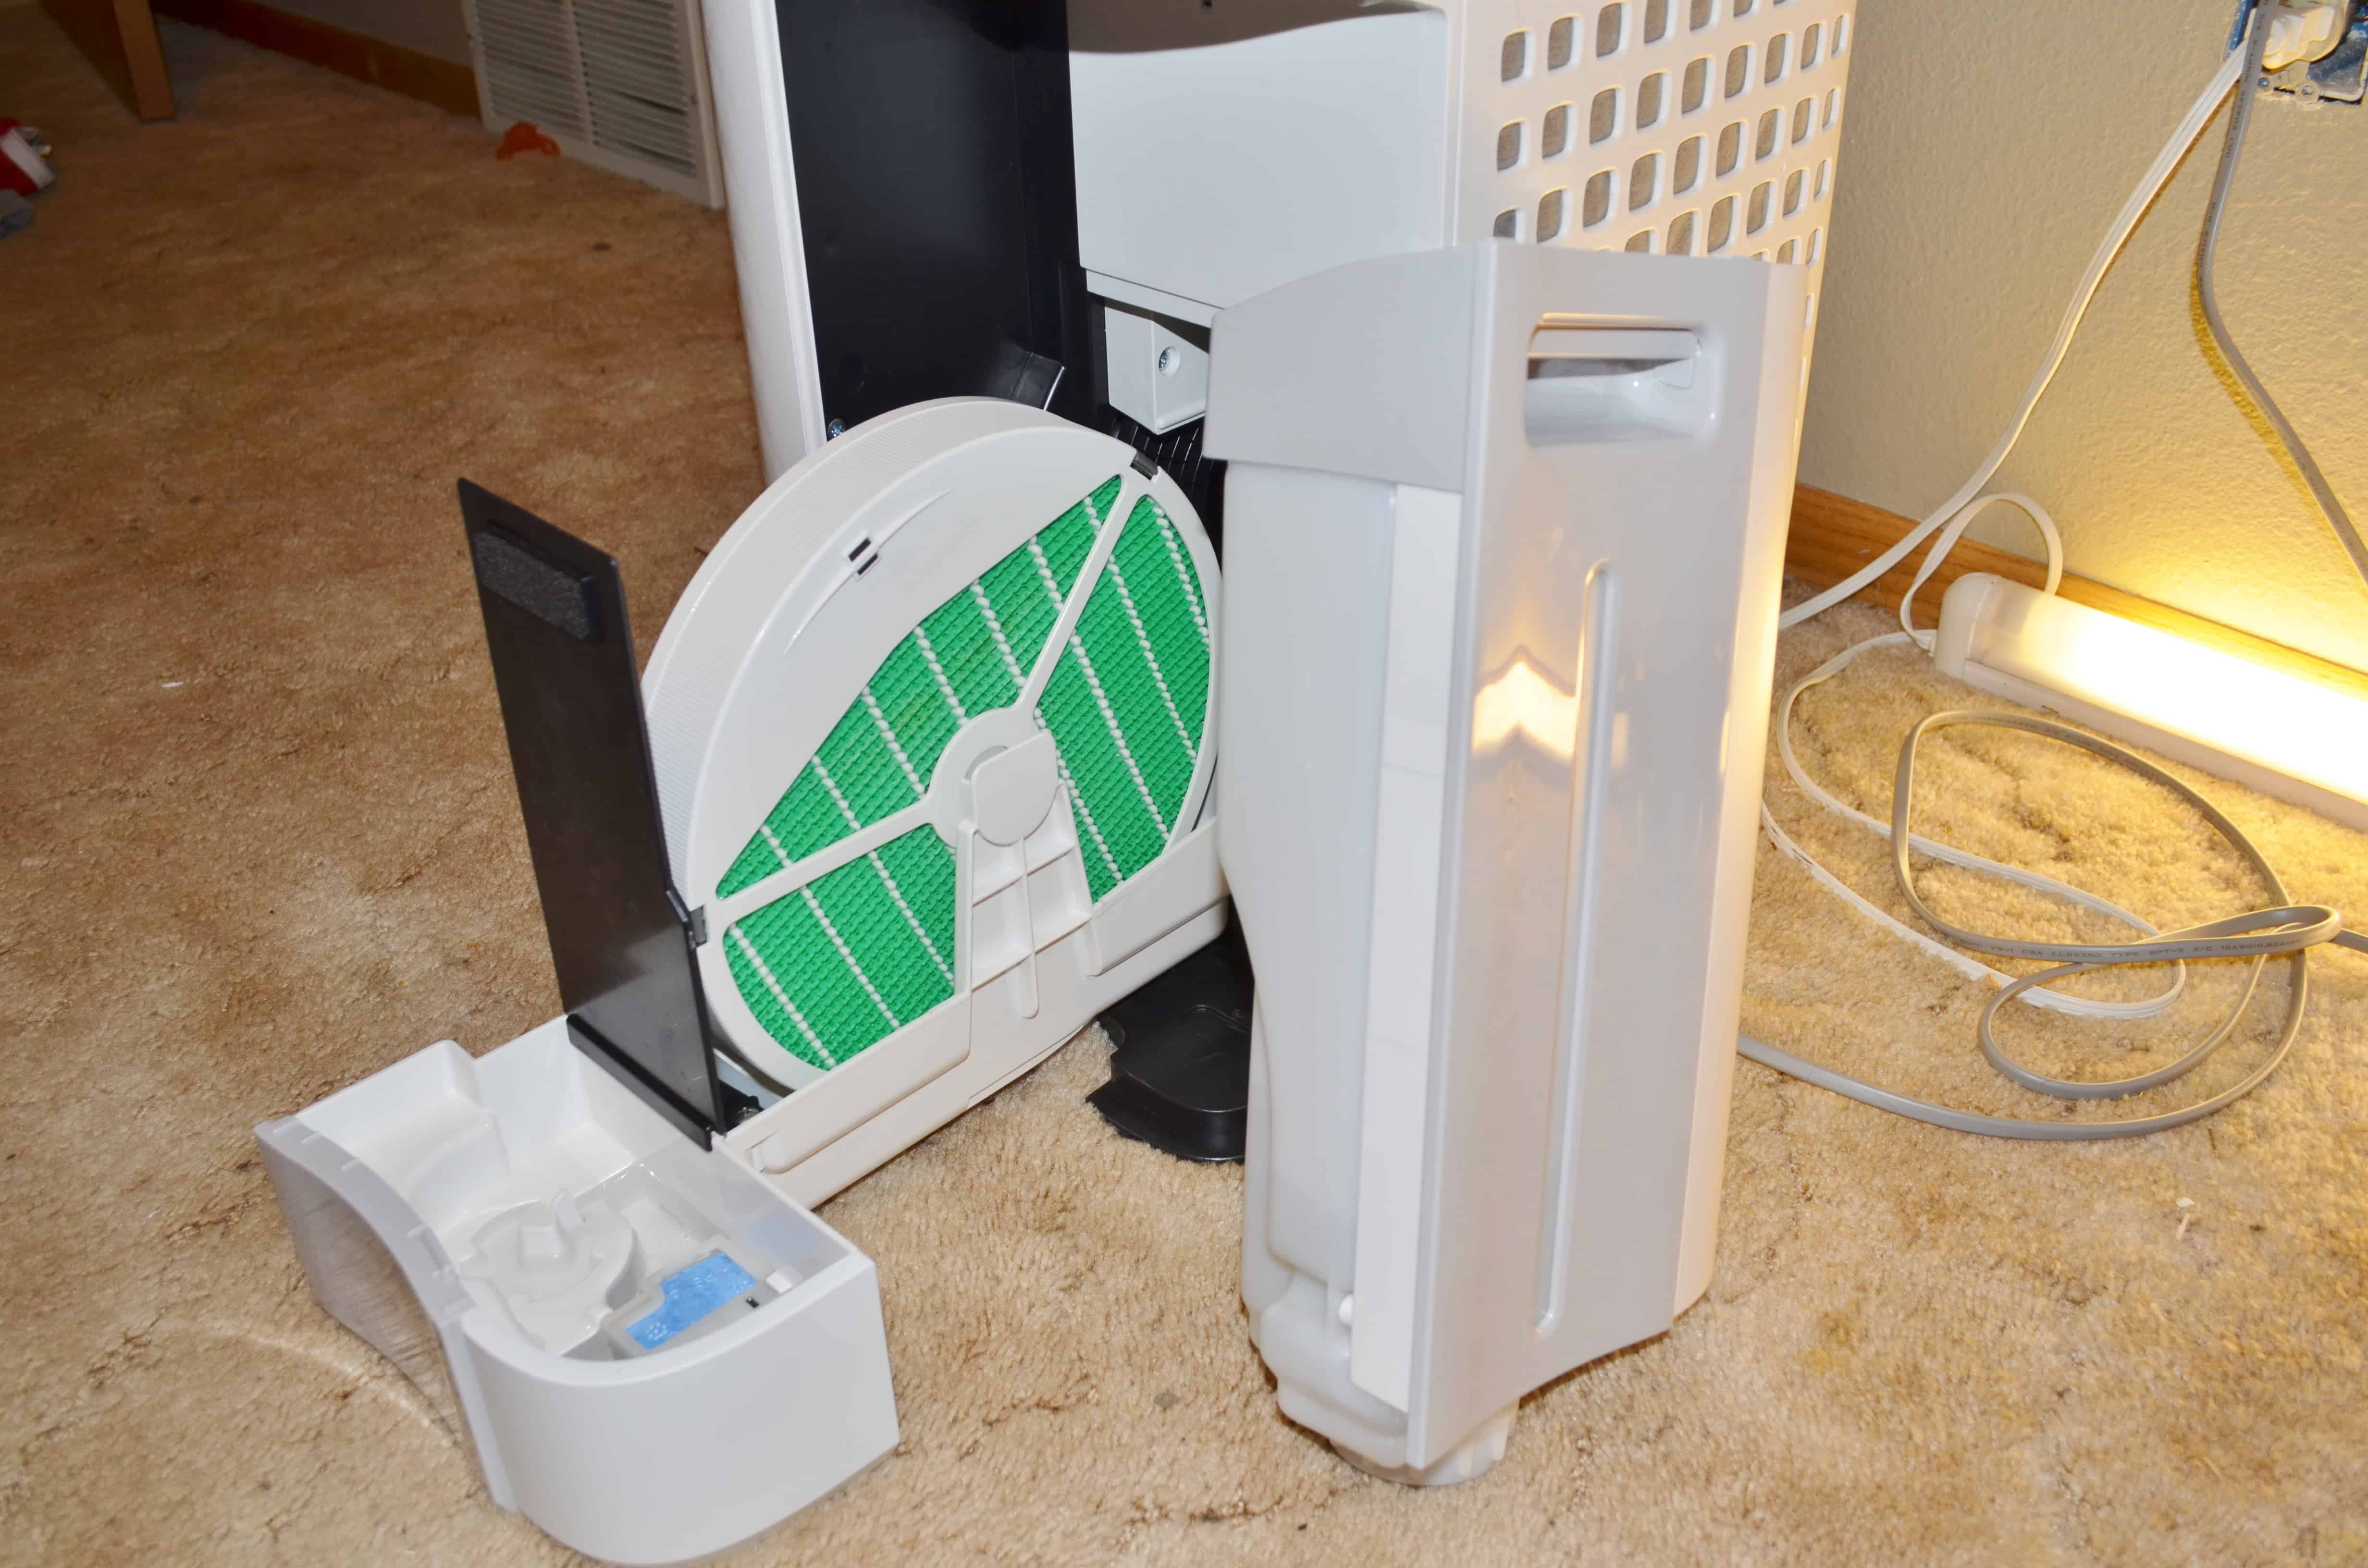 Sharp Plasmacluster Air Purifier with Humidifier Review